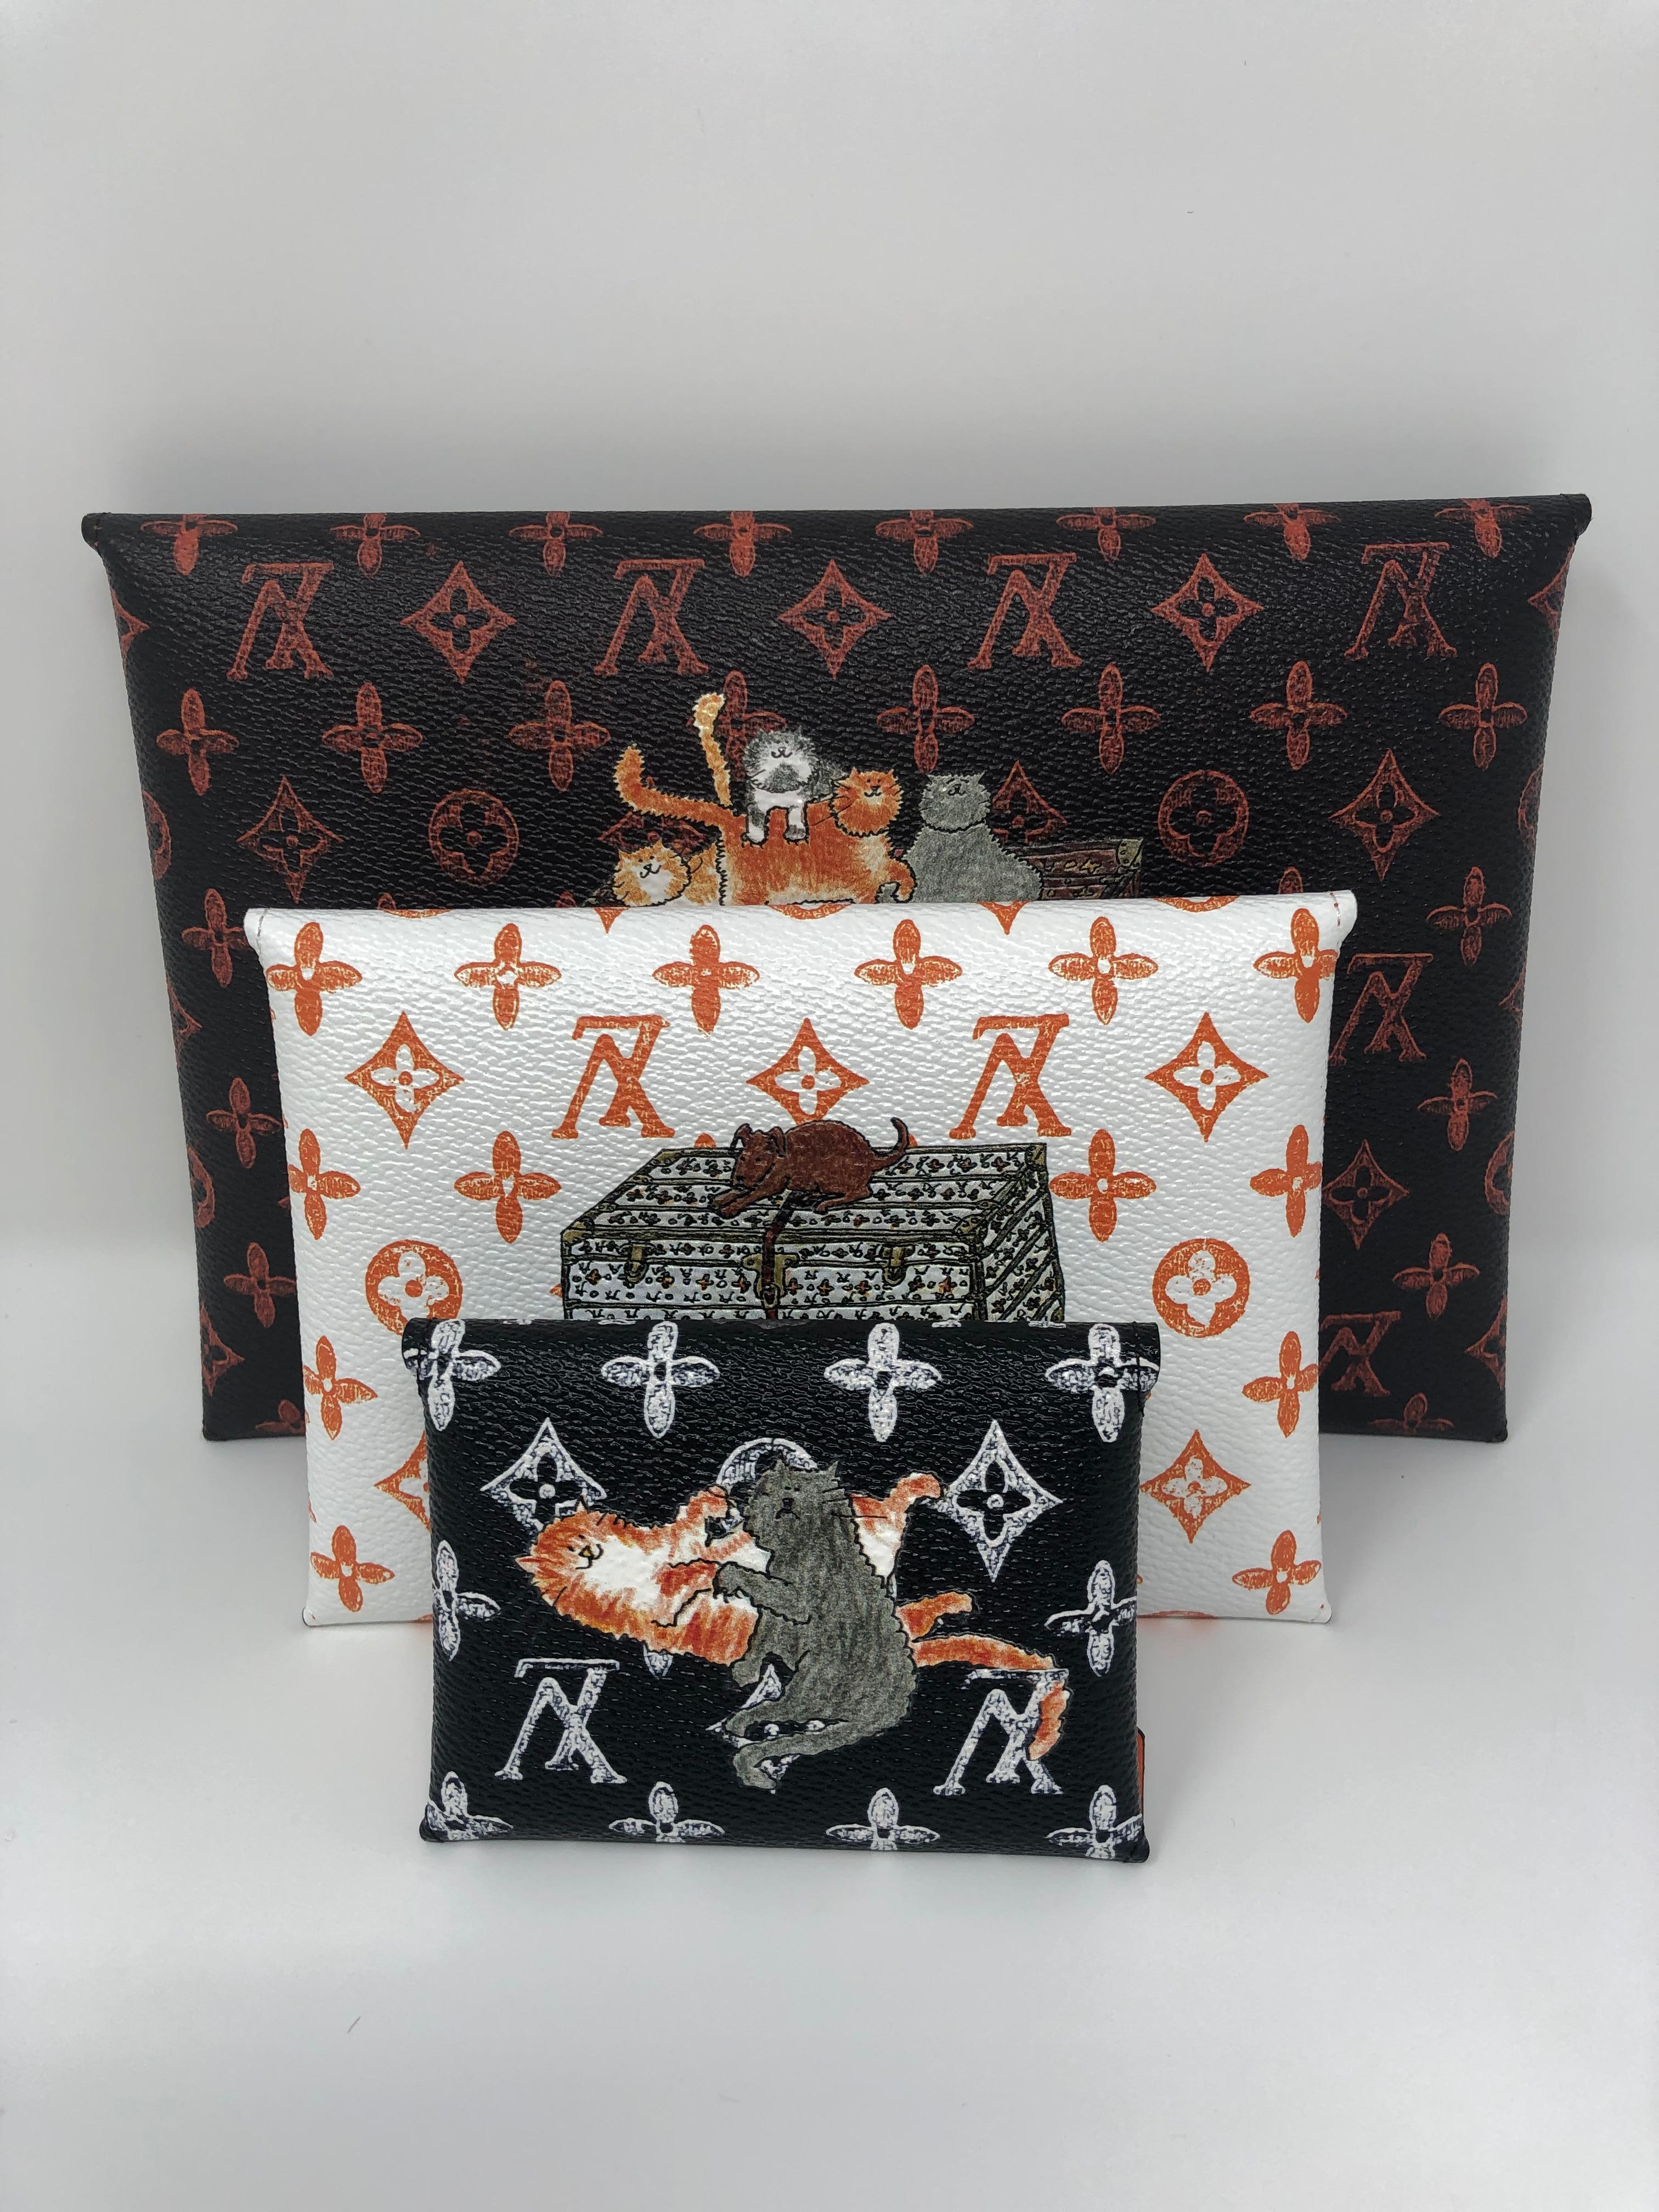 Louis Vuitton Catogram by Grace Coddington Kirigami Set. There are three different size clutch pouches that make this kirigami set. Brand new and very limited. Rare collector's piece. Includes the entire original set with dust cover and box.